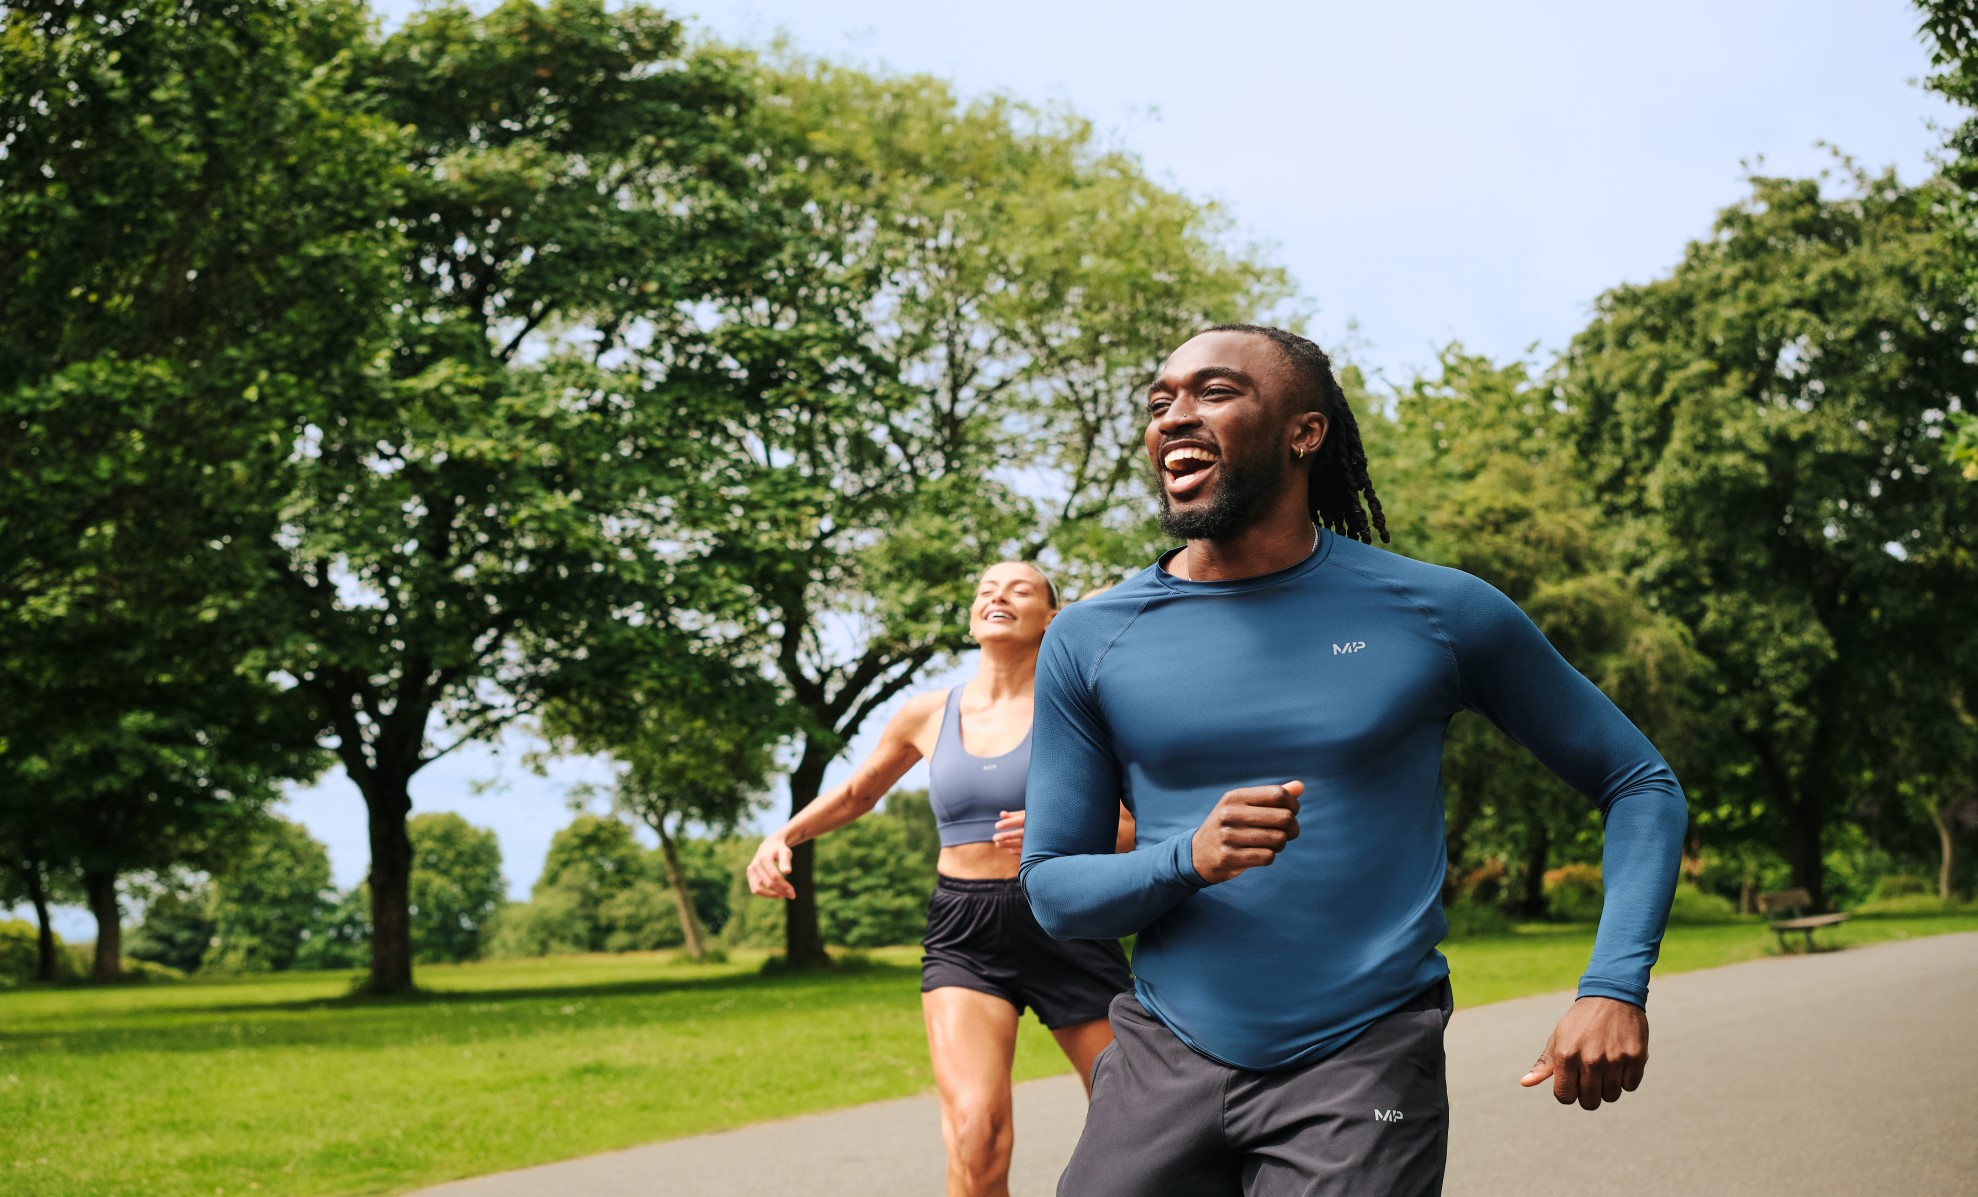 A man and a woman jogging in MP clothing through a public park smiling.